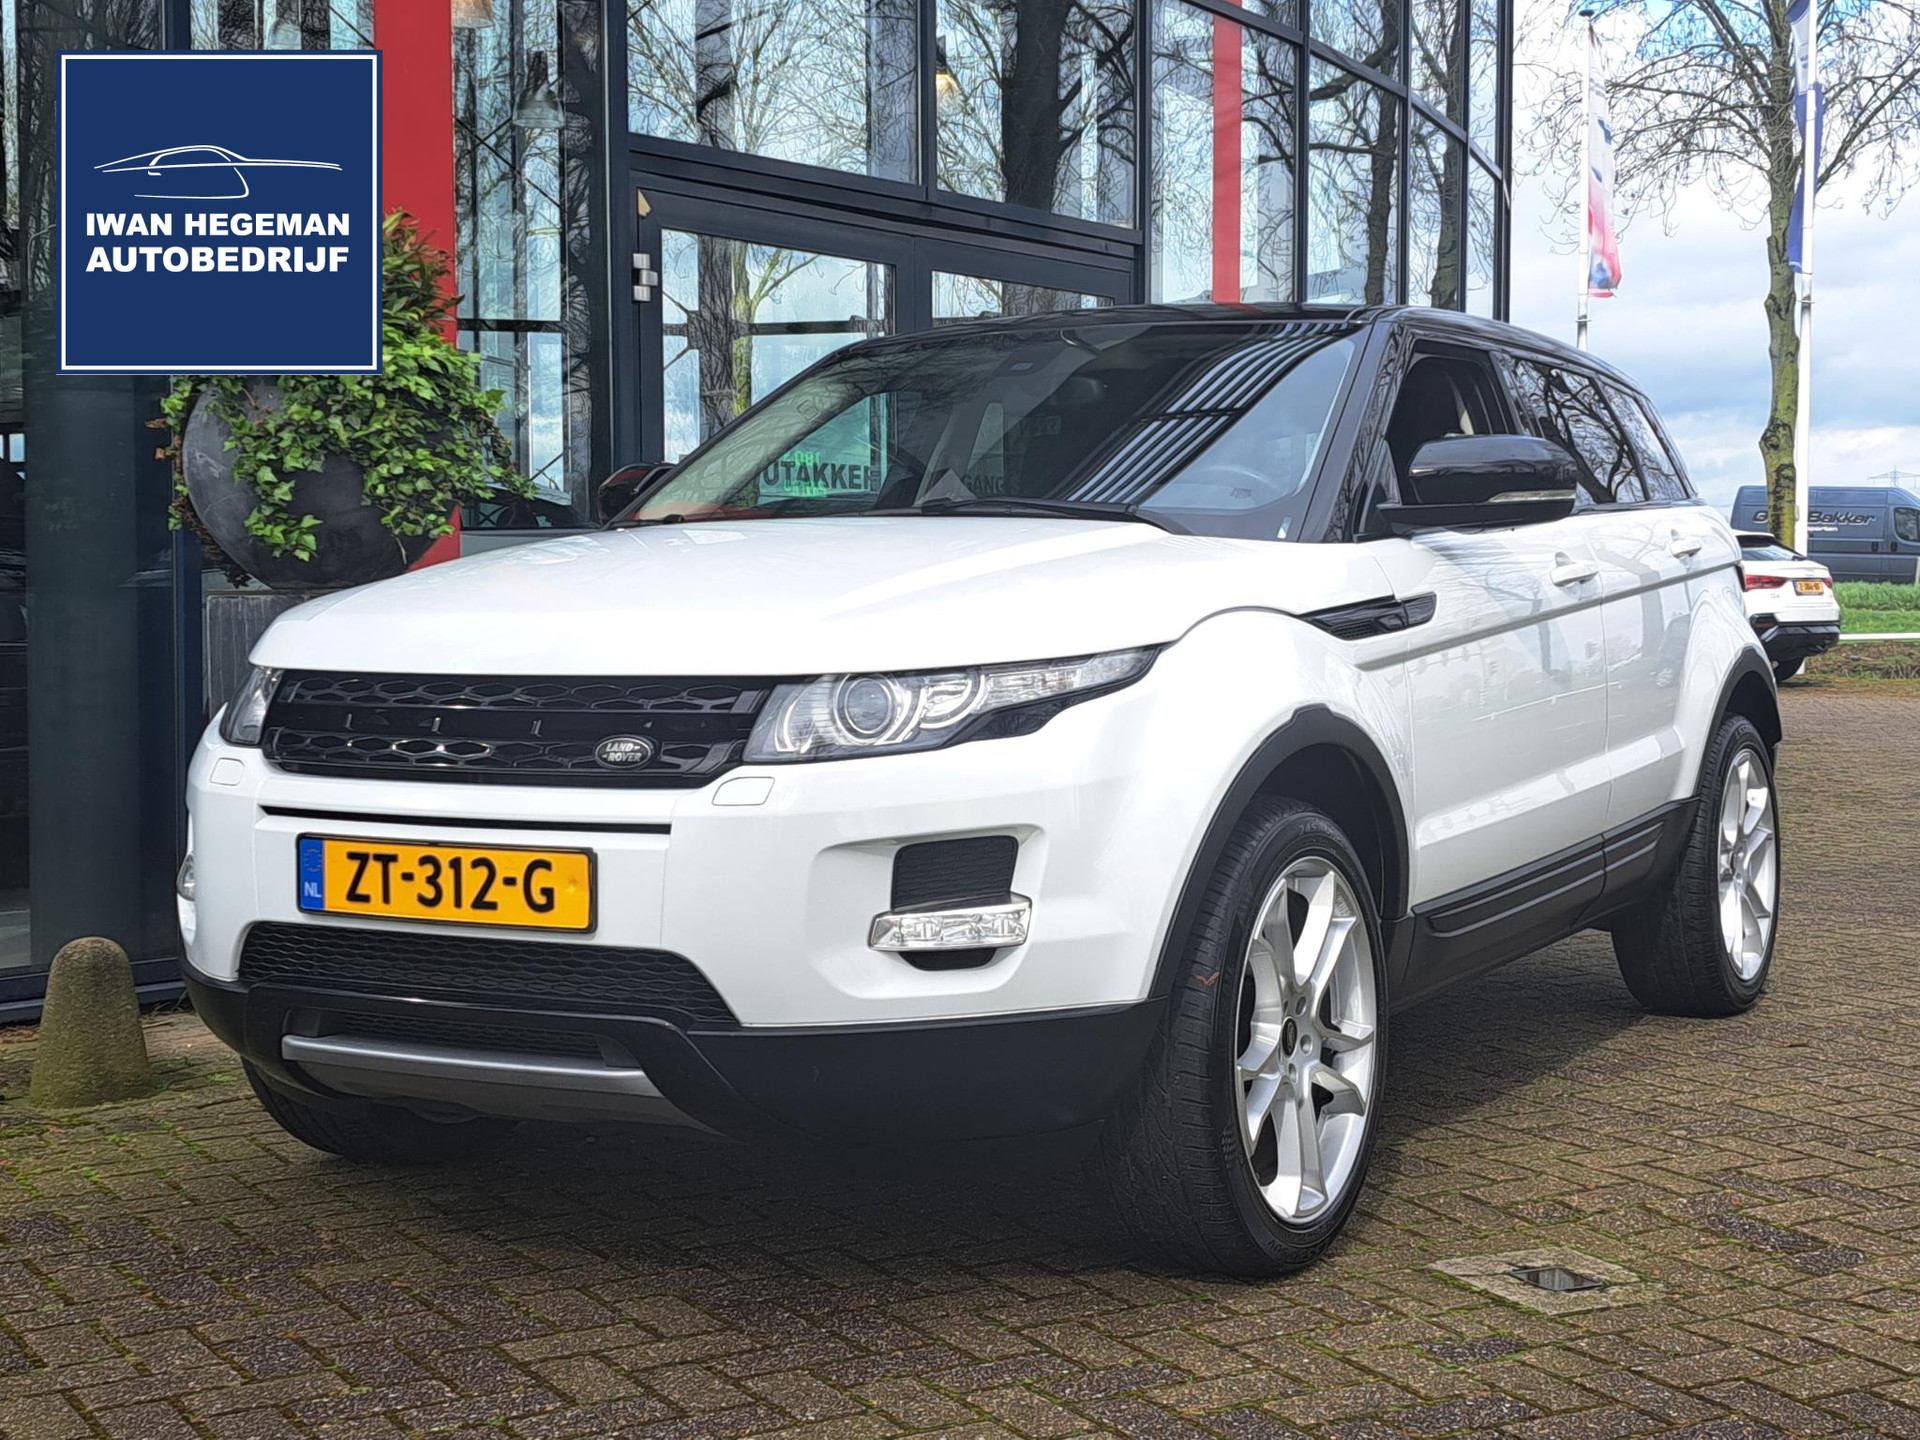 Land Rover Range Rover Evoque 2.0 Si 4WD AUTOMAAT | Airco | LM Velgen | PDC | Cruise Control bij viaBOVAG.nl